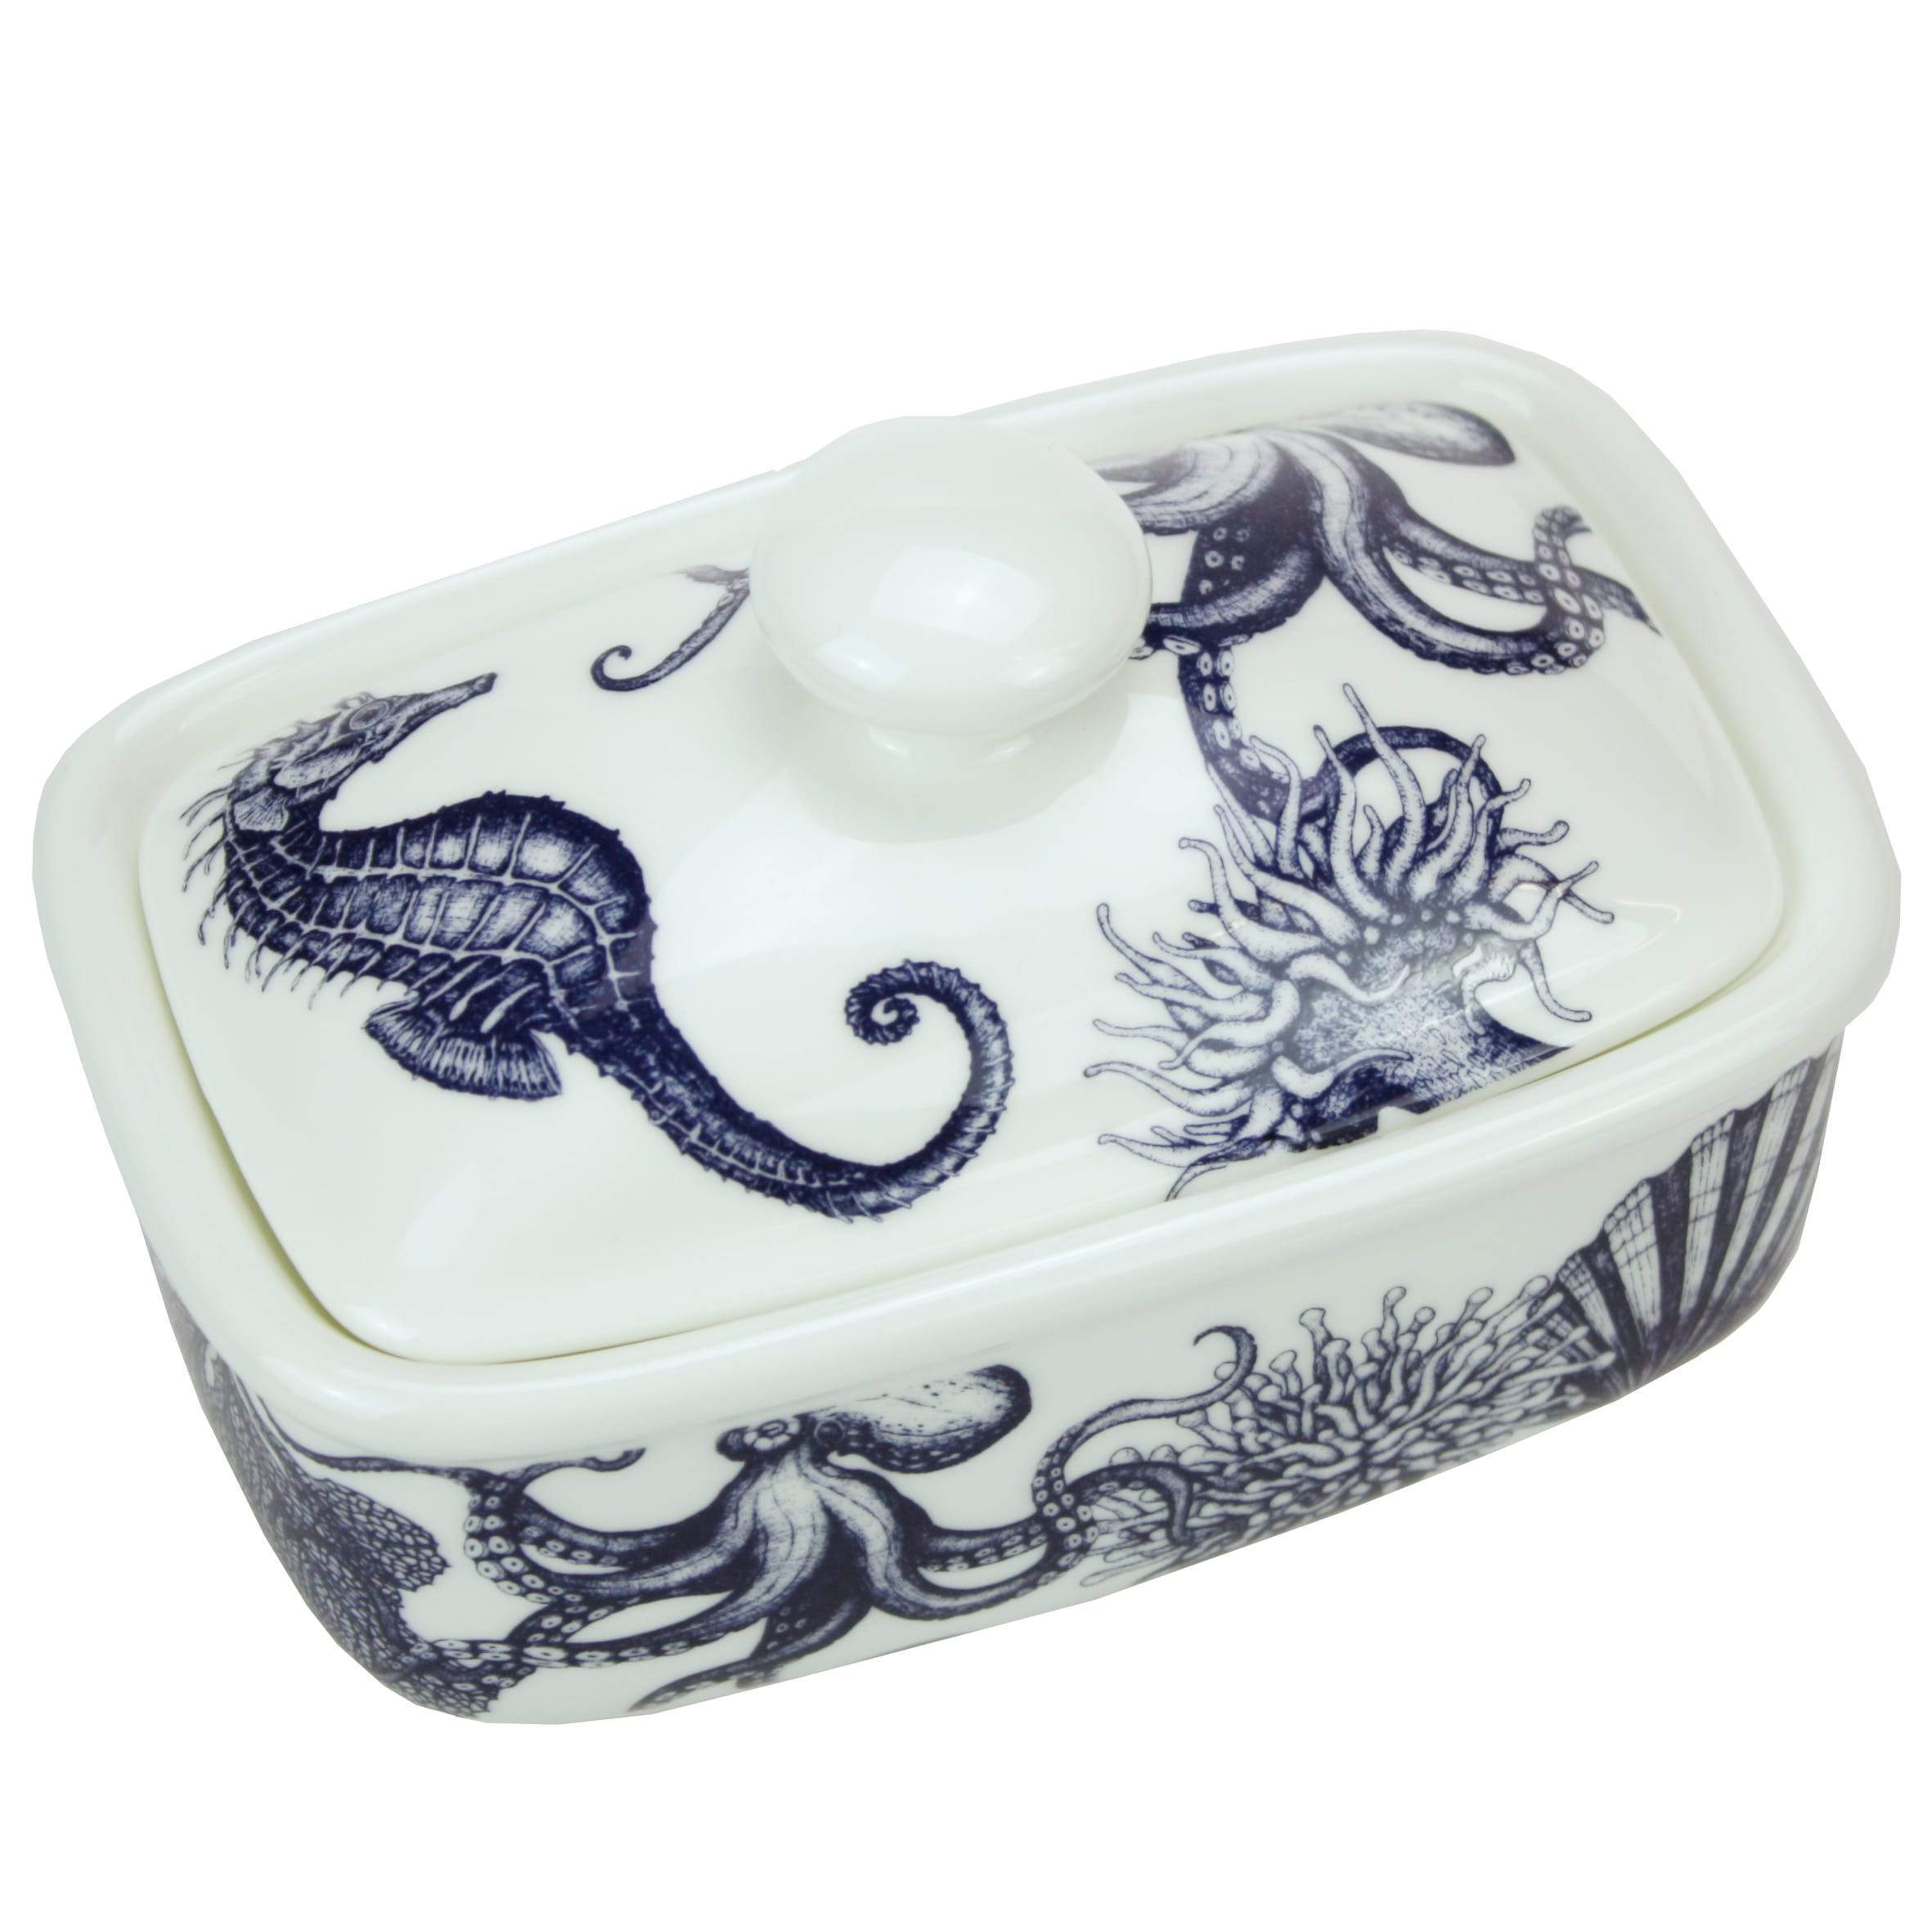 Butter dish in our Classic range,with seahorses,shells,octopus and other sea themed designs all over the base and the lid